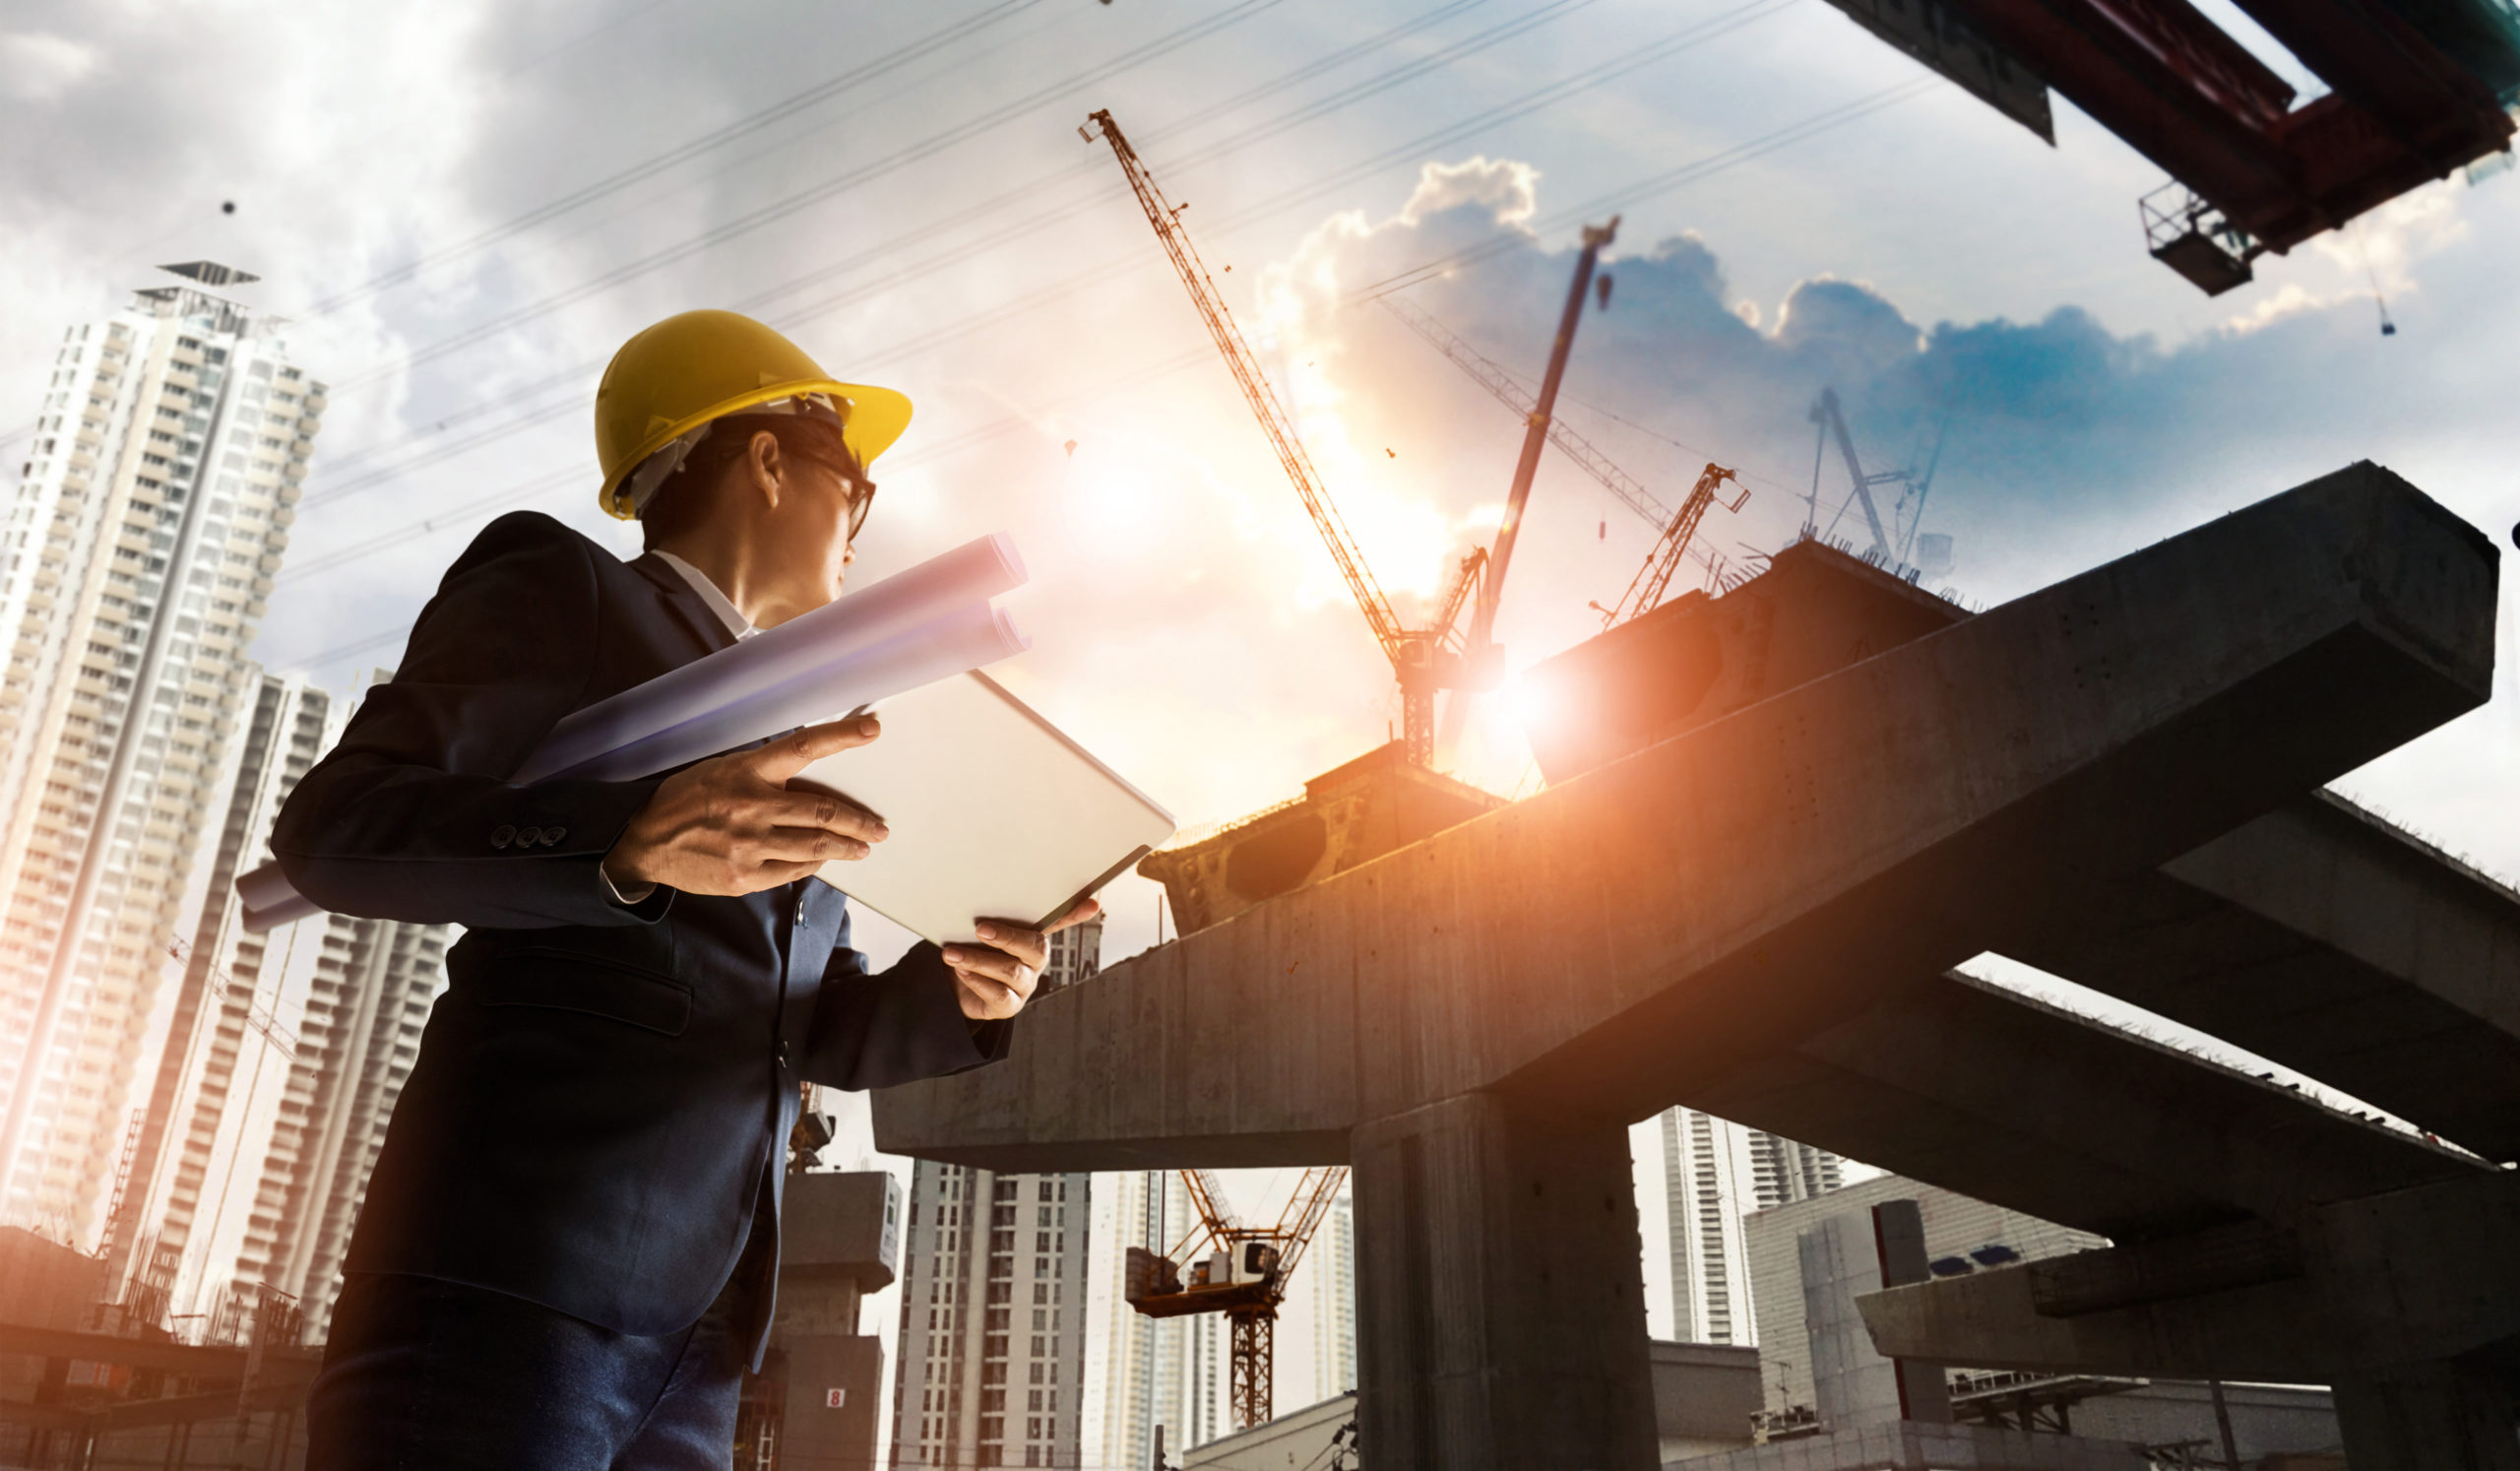 A man in a business suit and construction hat is looking up to a concrete structure near multiple cranes that is being highlighted by the sun.